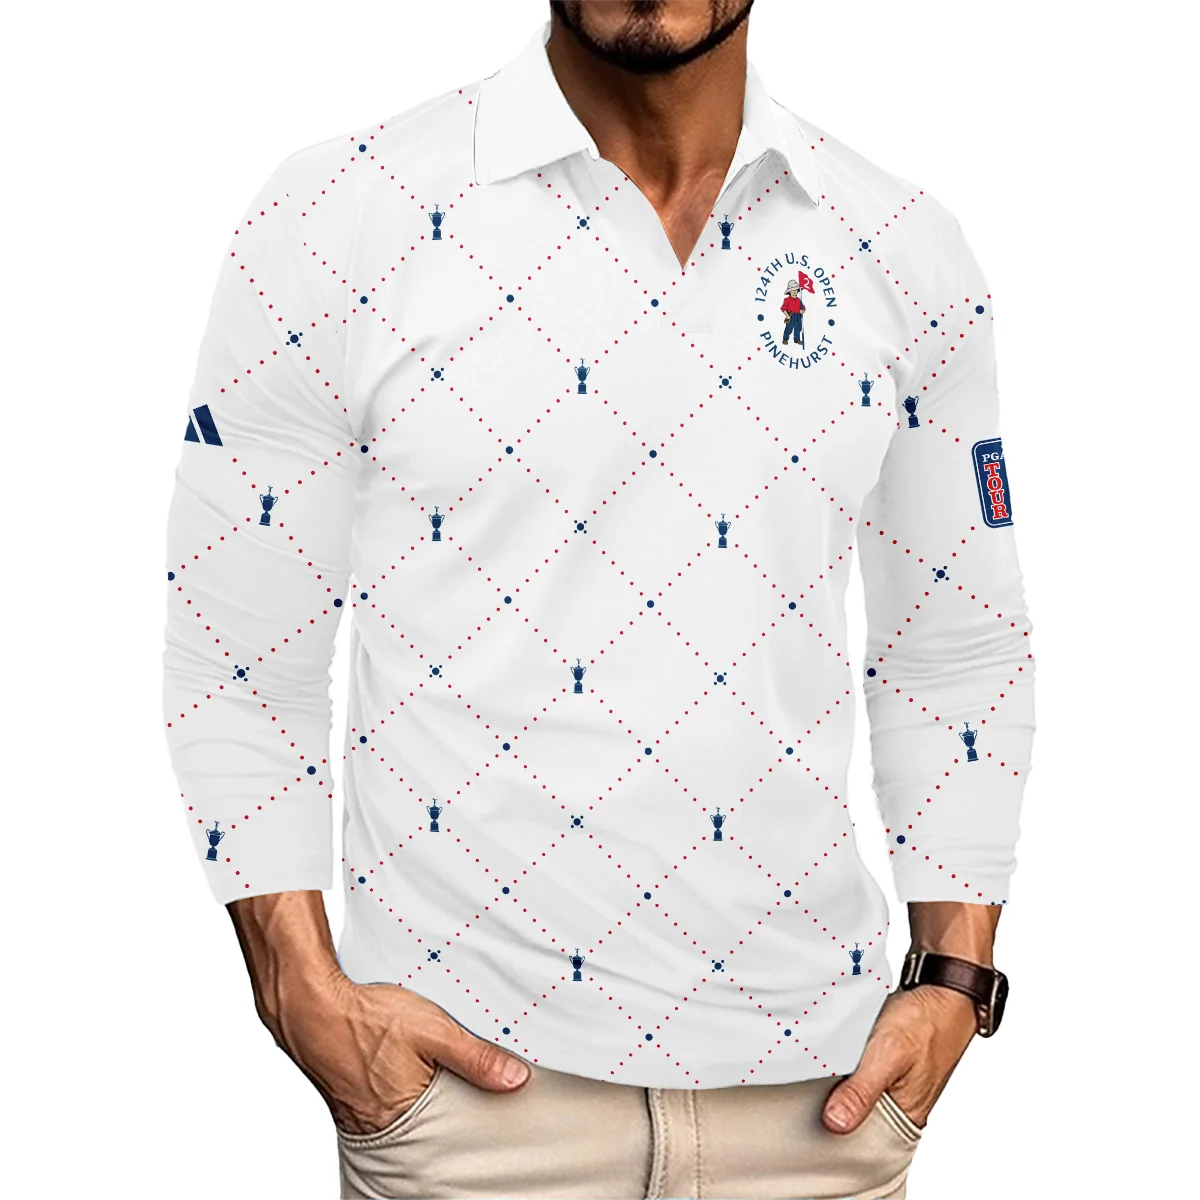 Argyle Pattern With Cup 124th U.S. Open Pinehurst Adidas Vneck Long Polo Shirt Style Classic Long Polo Shirt For Men